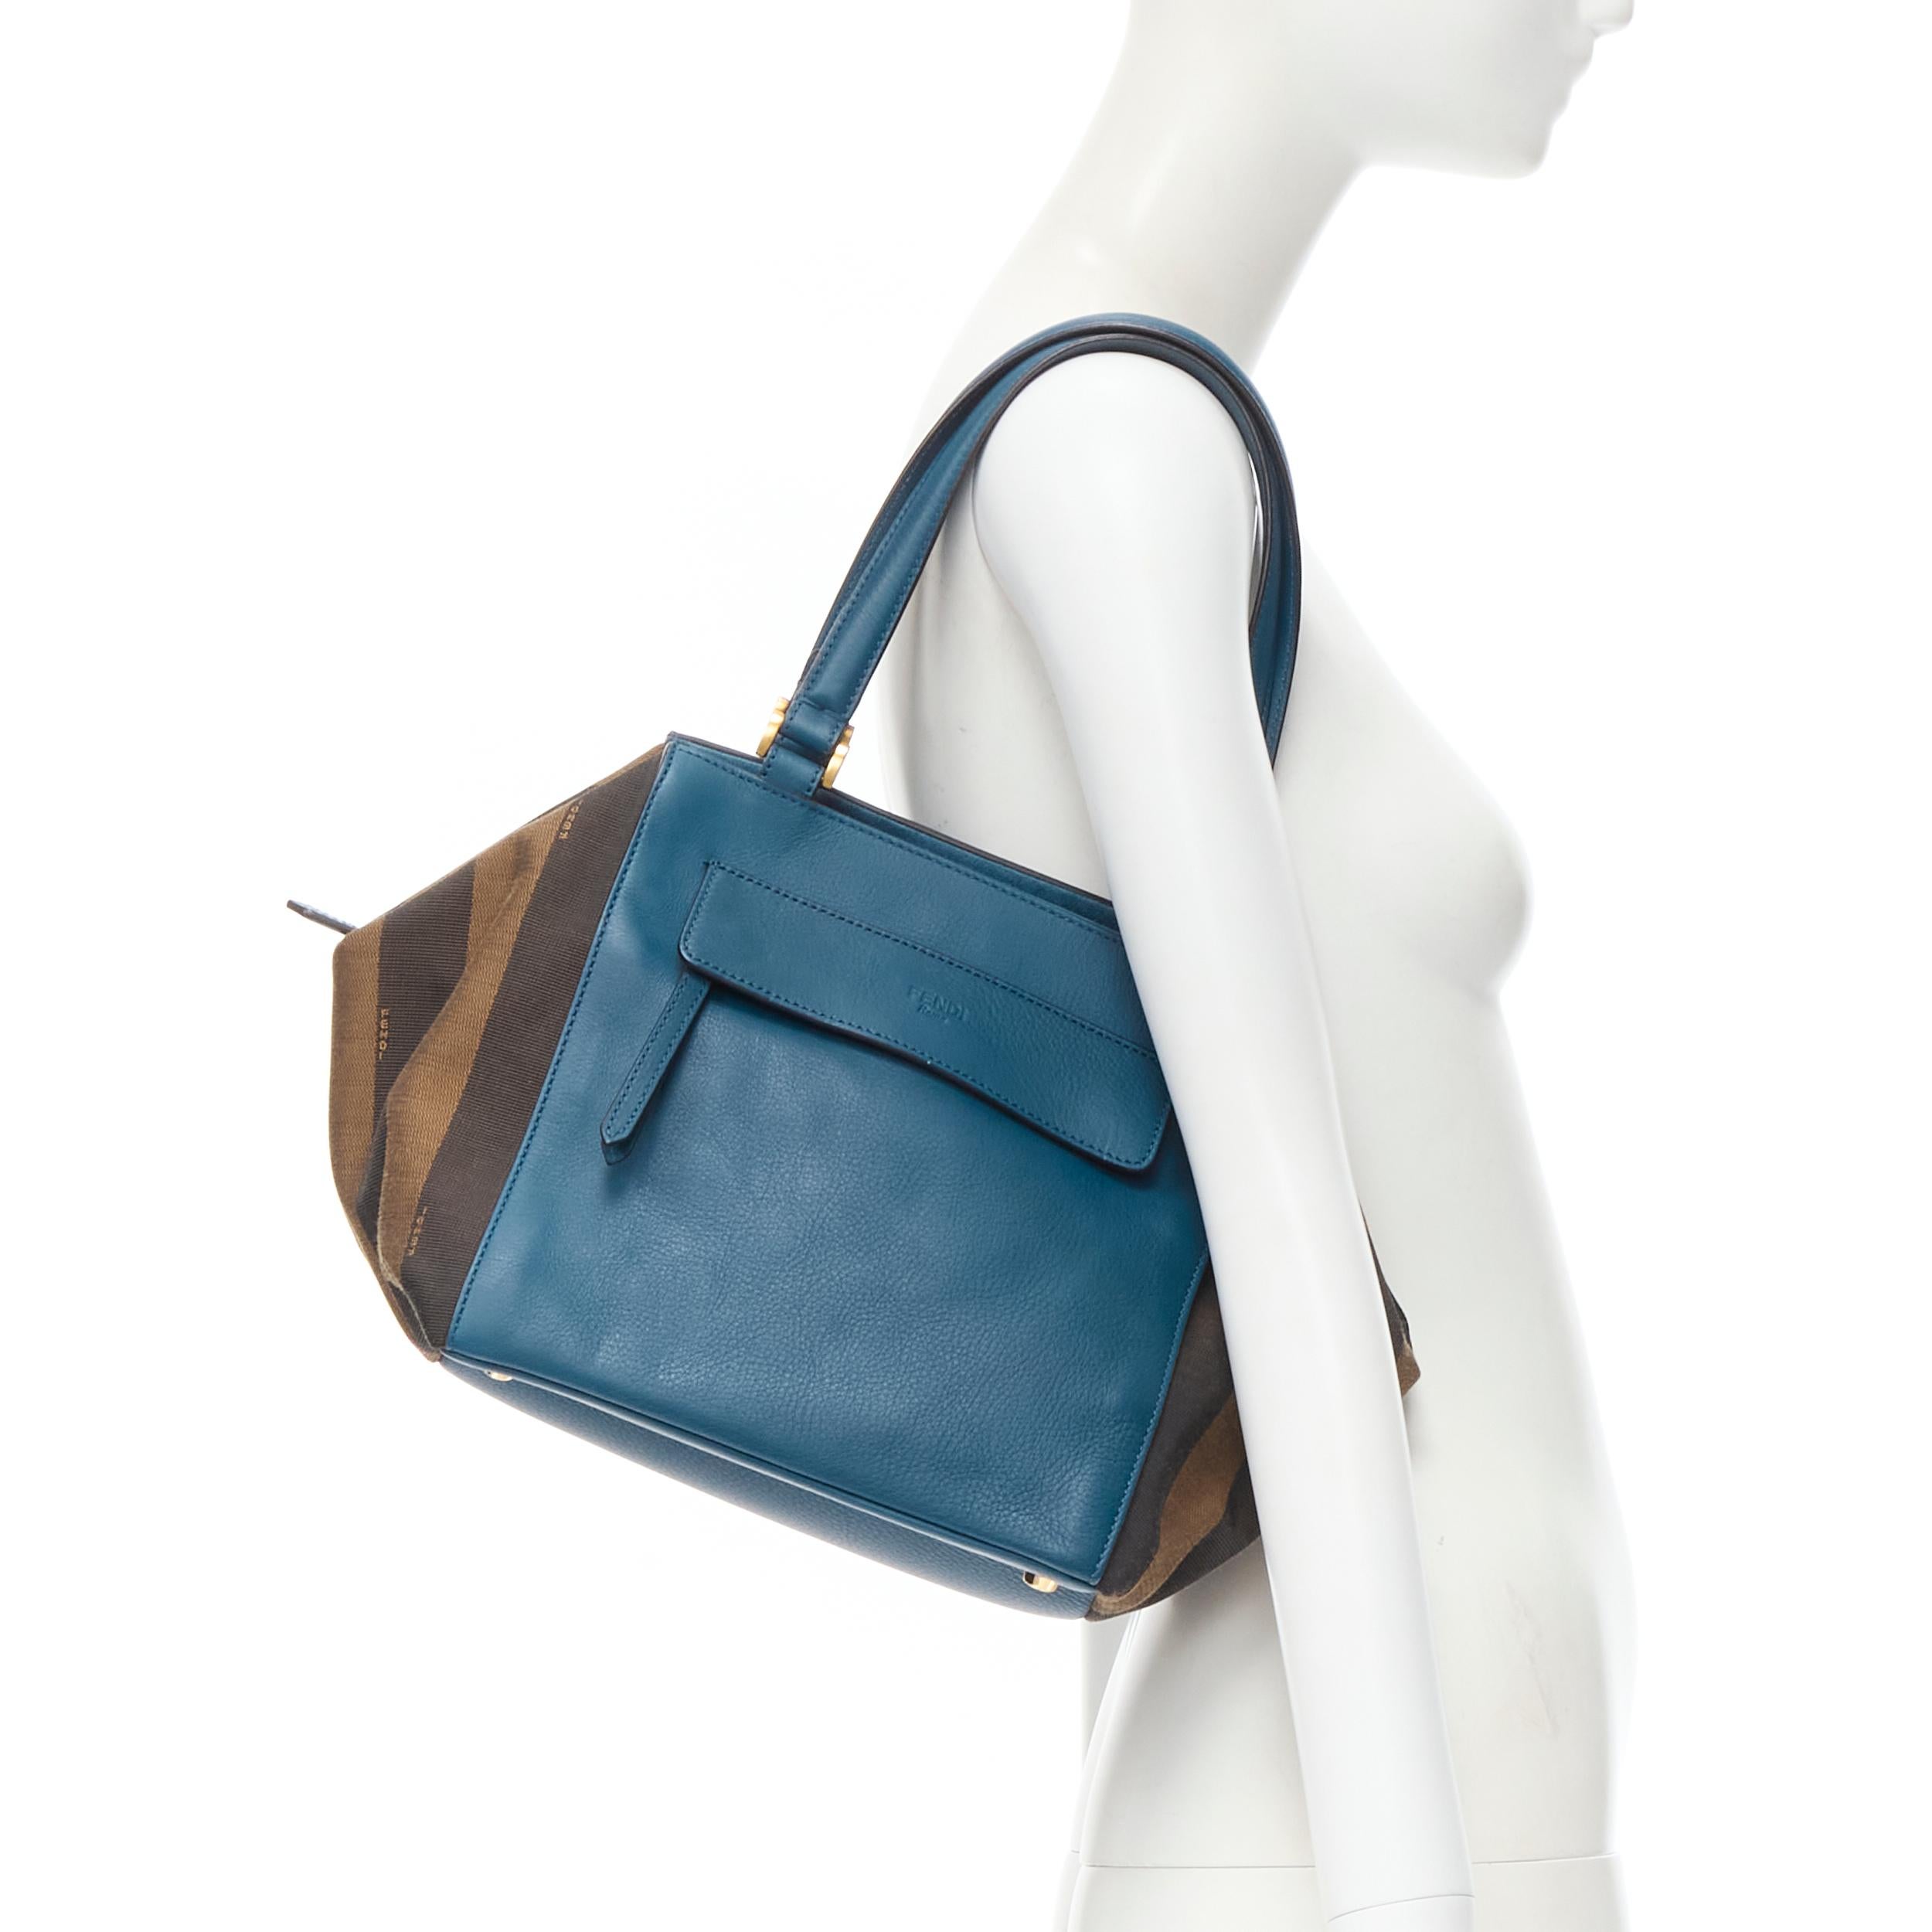 FENDI navy blue leather Penguine stripe canvas flared side tote bag 
Reference: CELG/A00031 
Brand: Fendi 
Model: Tobacco Pequin Stripe Canvas Boston 
Material: Leather 
Color: Blue 
Pattern: Striped 
Closure: Magnet 
Extra Detail: Leather upper.